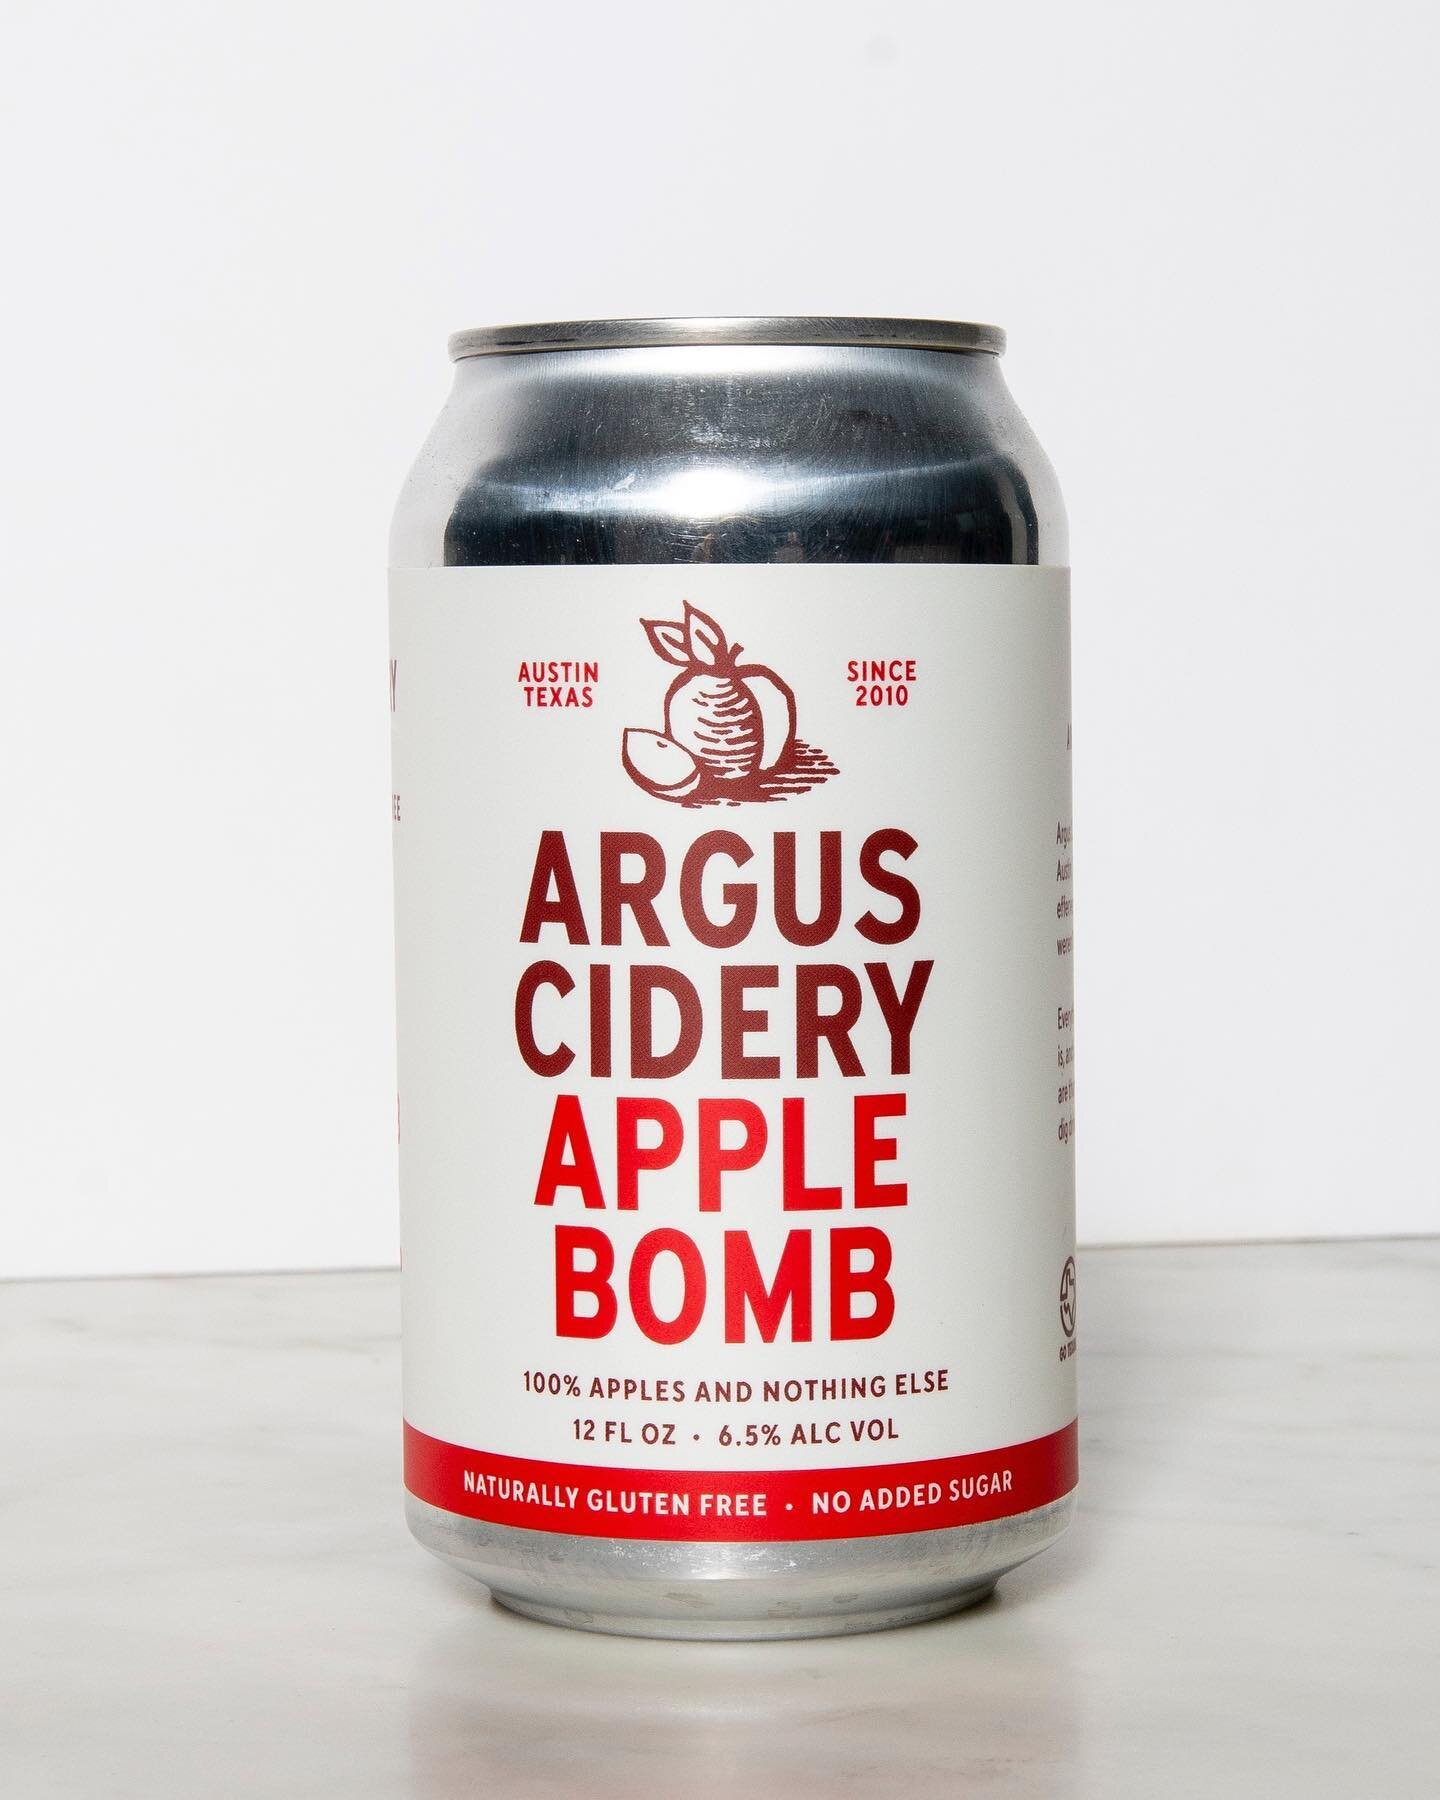 We're back! After just over two years, we are in production and packaging up Apple Bomb headed to Central Texas shelves and tap walls. And although our can look is updated, we are sticking to our roots, producing dry, effervescent ciders with no adde